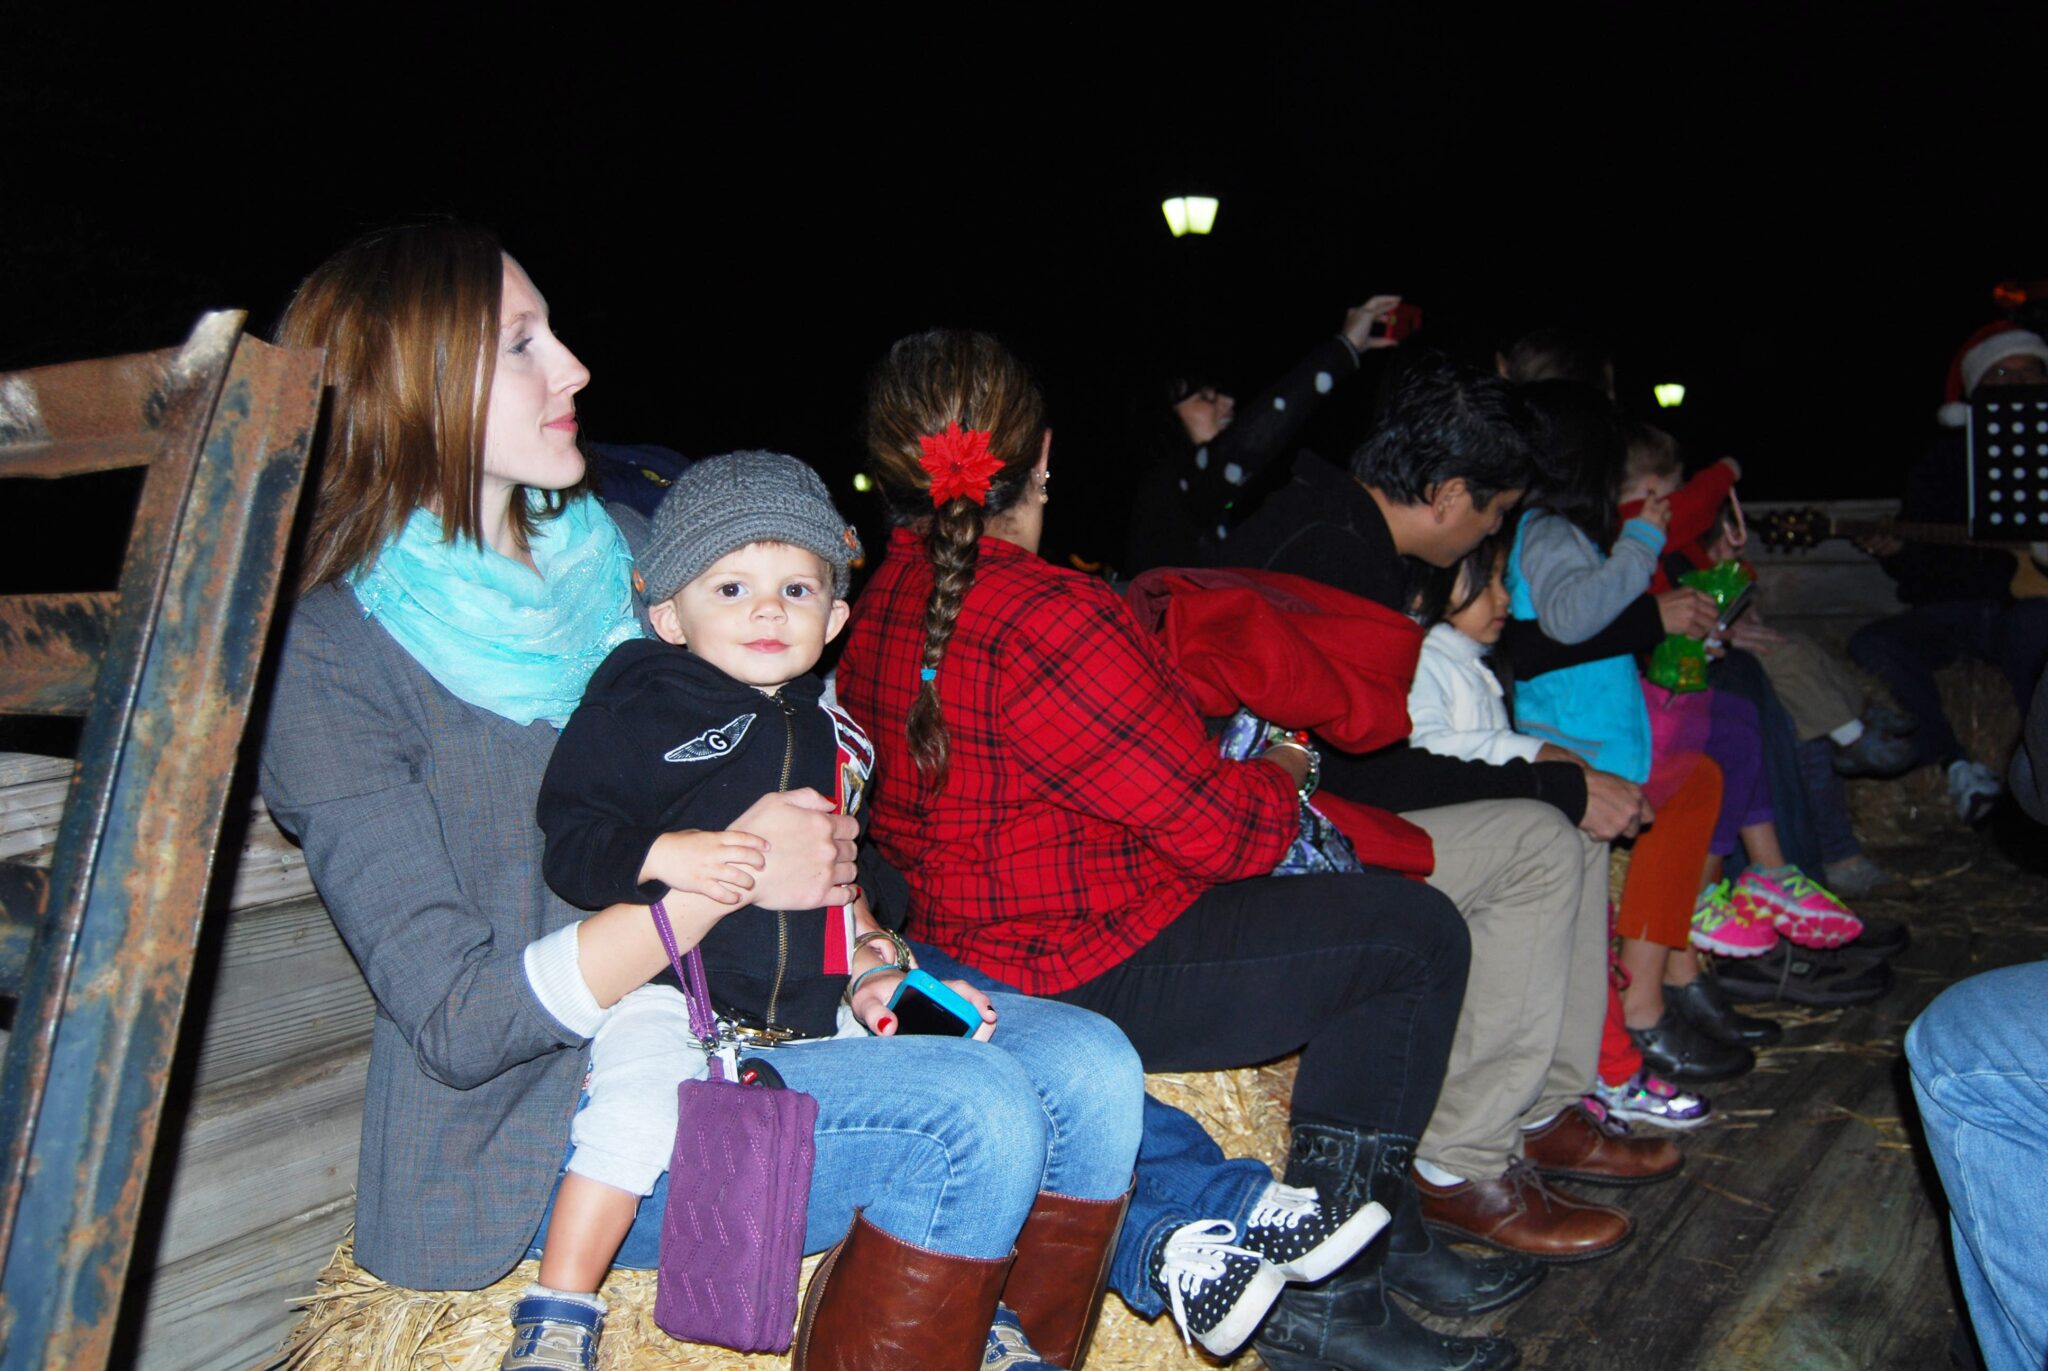 Everyone is invited to Friday’s hayride and marshmallow roasting from 6 to 8 p.m. at the Goose Creek Municipal Center.